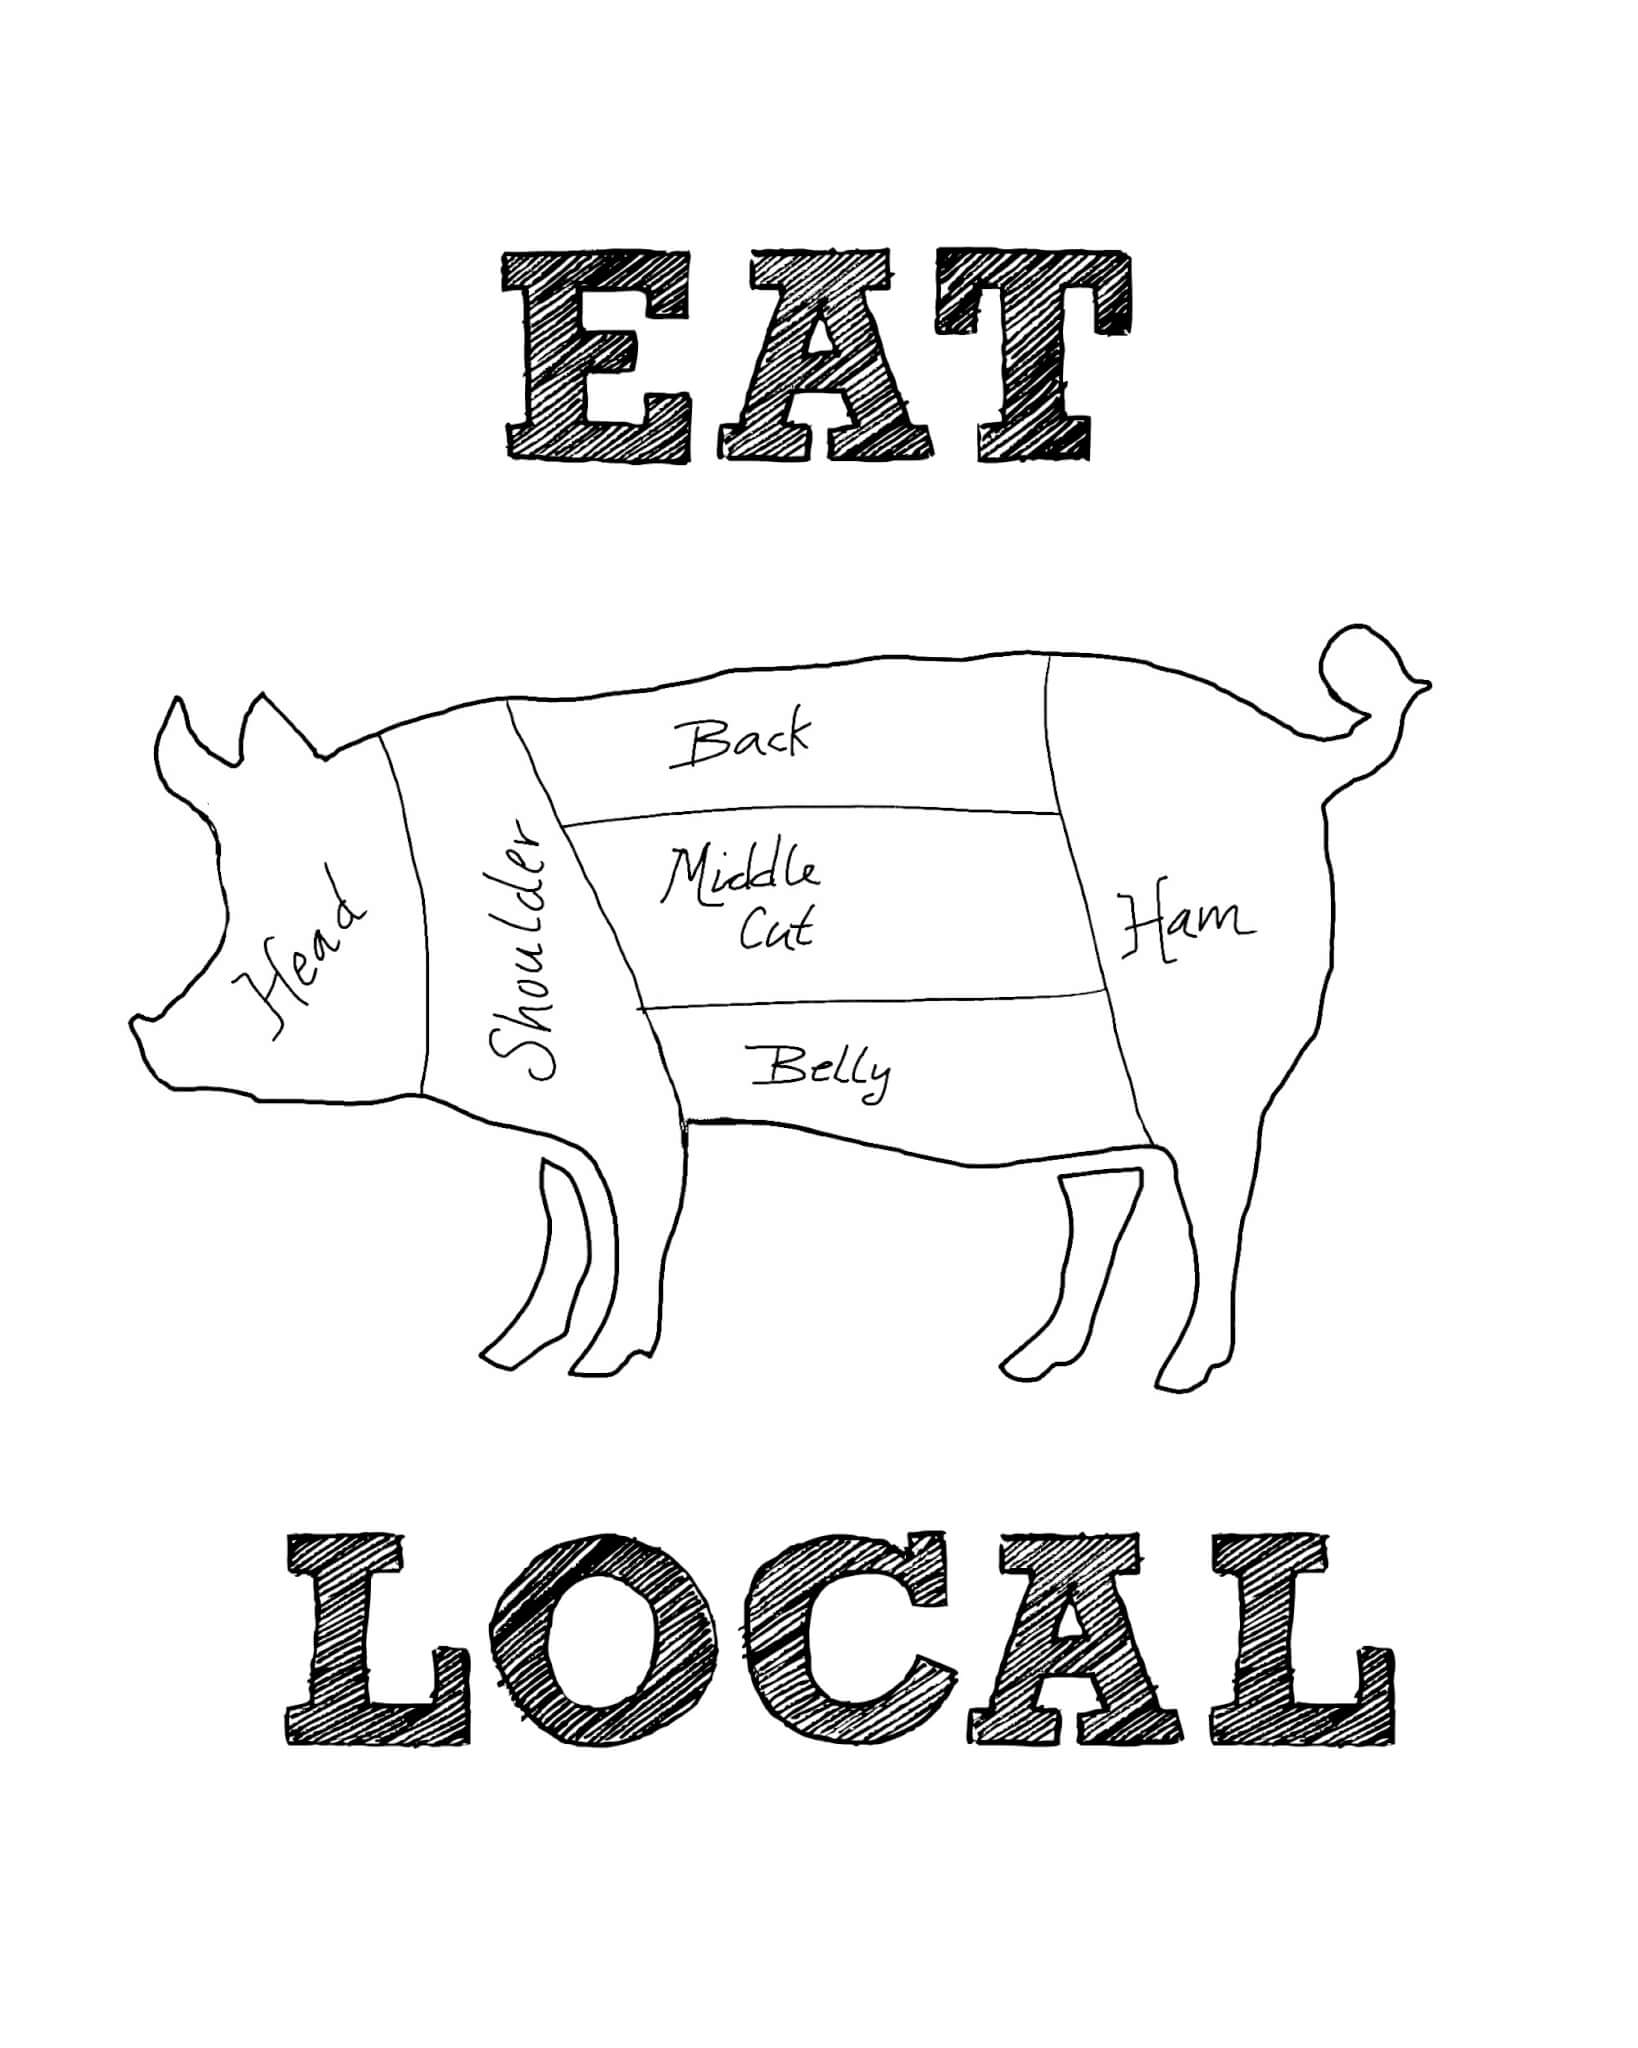 Are you looking for another awesome FREE farmhouse printable? This EAT LOCAL printable is perfect!